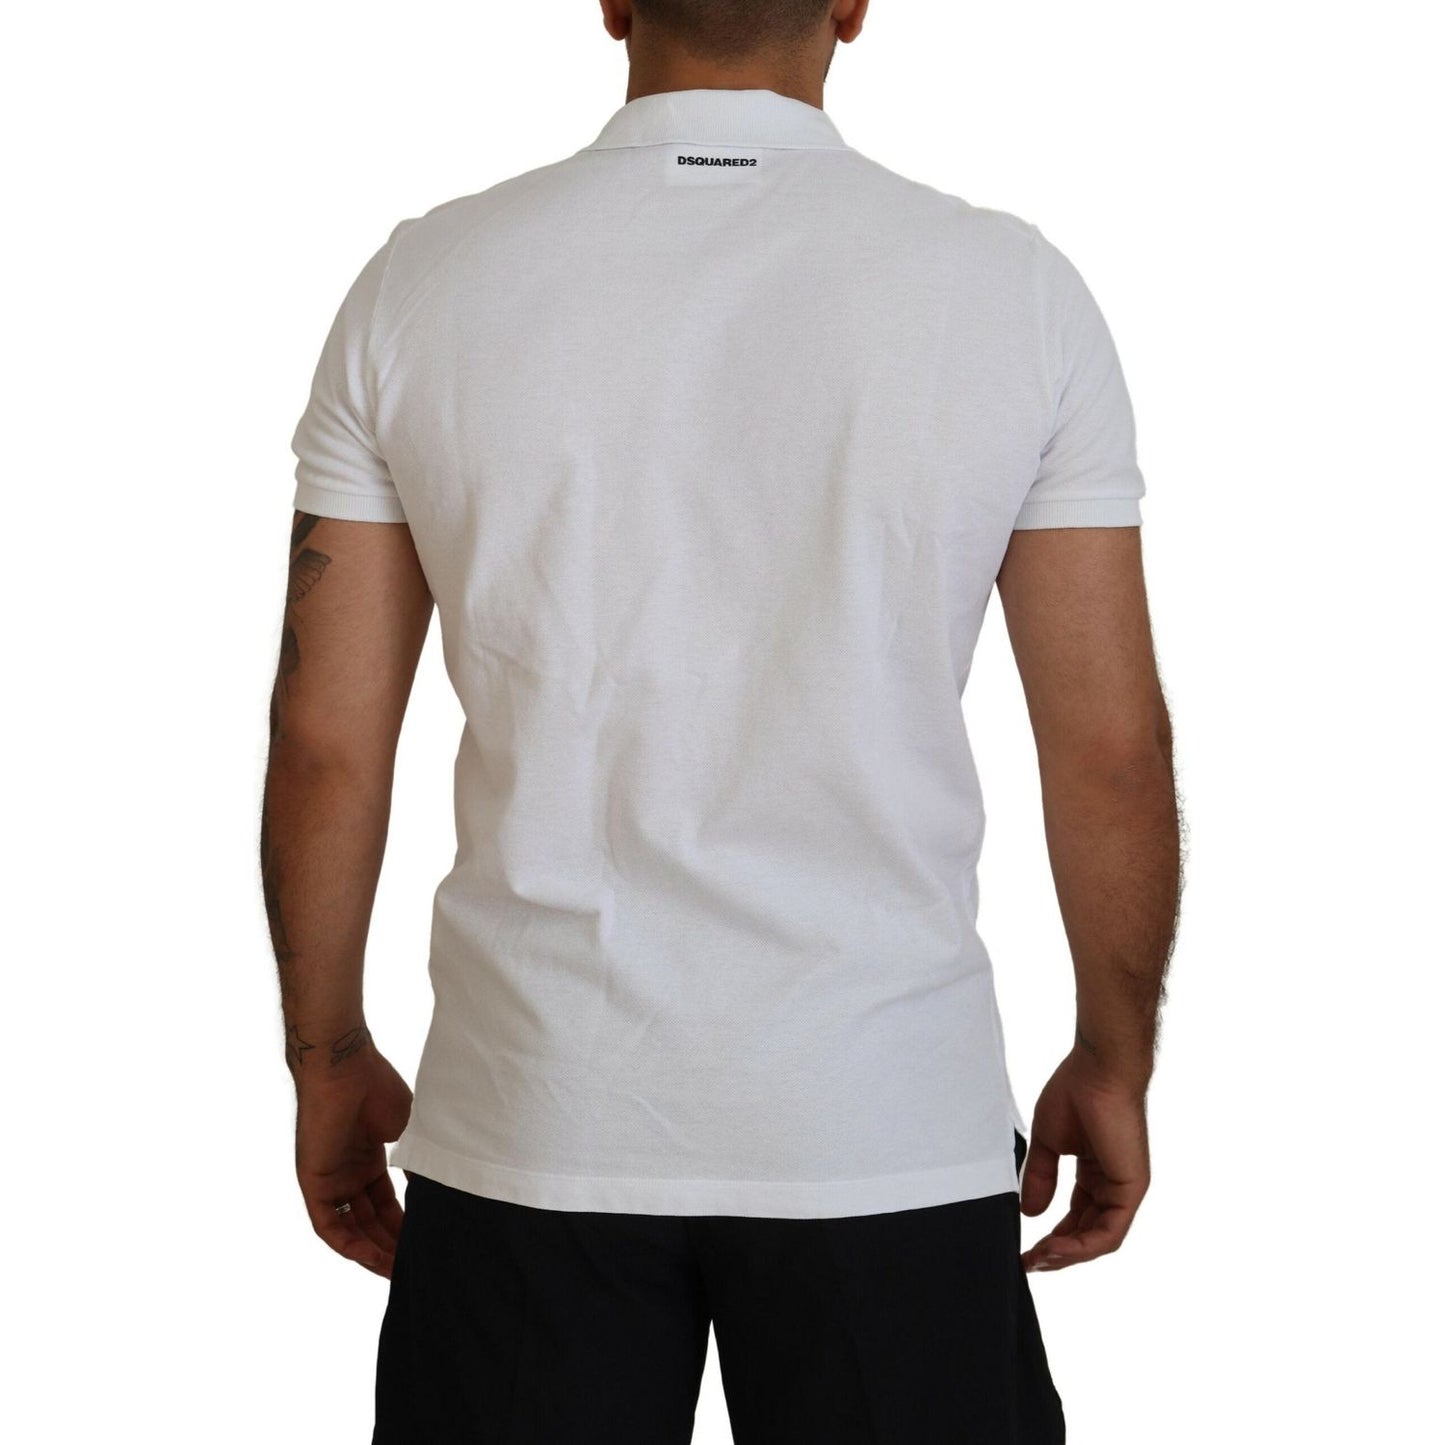 Dsquared² White Cotton Short Sleeves Collared T-shirt white-cotton-short-sleeves-collared-t-shirt-1